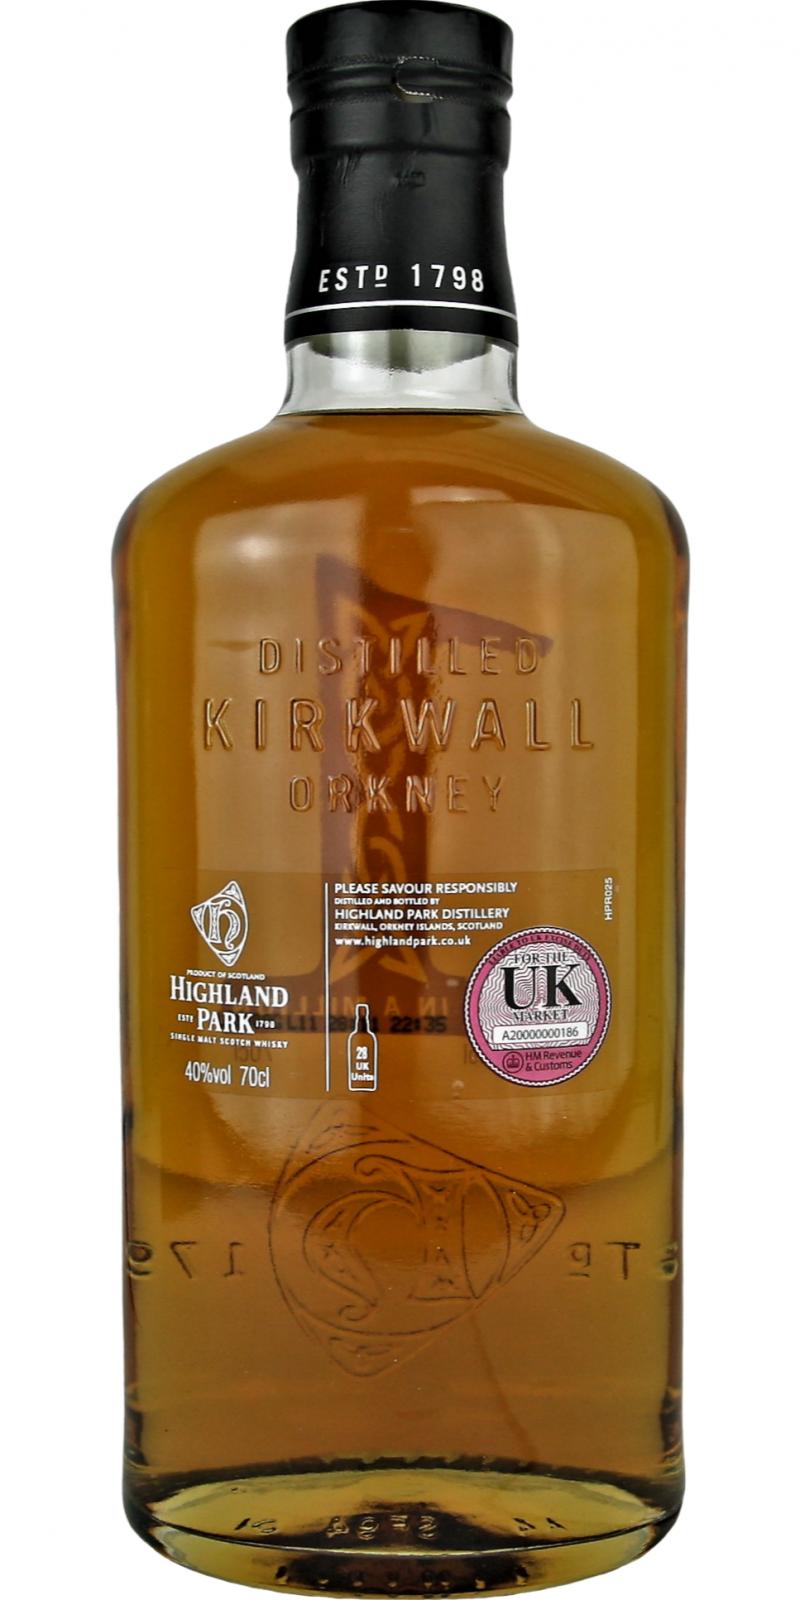 Highland Park 12-year-old - Value and price information - Whiskystats